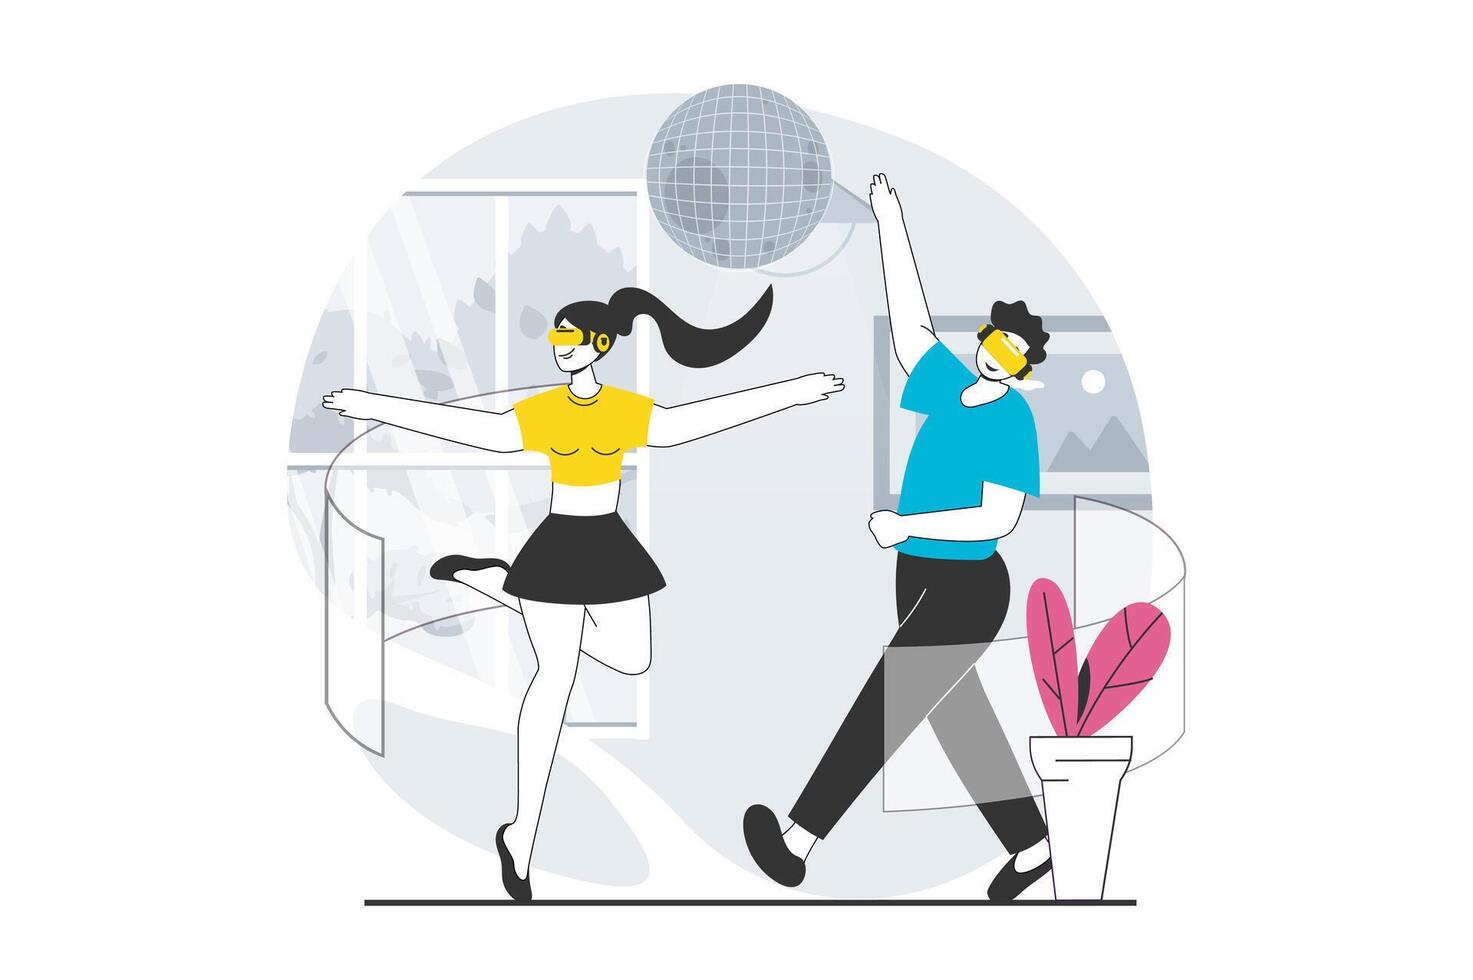 Virtual reality concept with people scene in flat design for web. Woman and man in VR headsets dancing in club augmented simulation. Vector illustration for social media banner, marketing material.